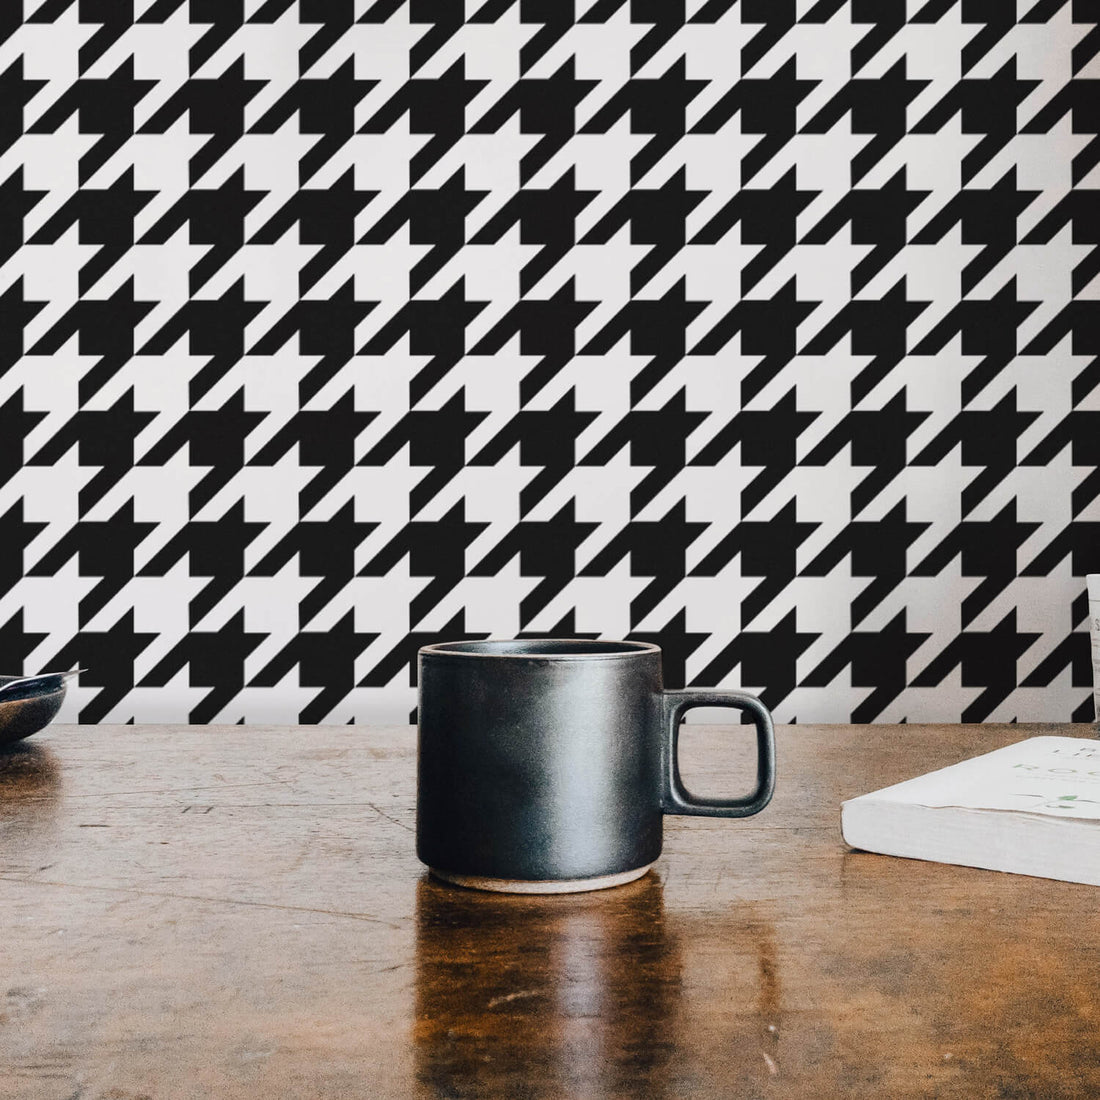 classic black and white houndstooth pattern removable wallpaper for chic interior design